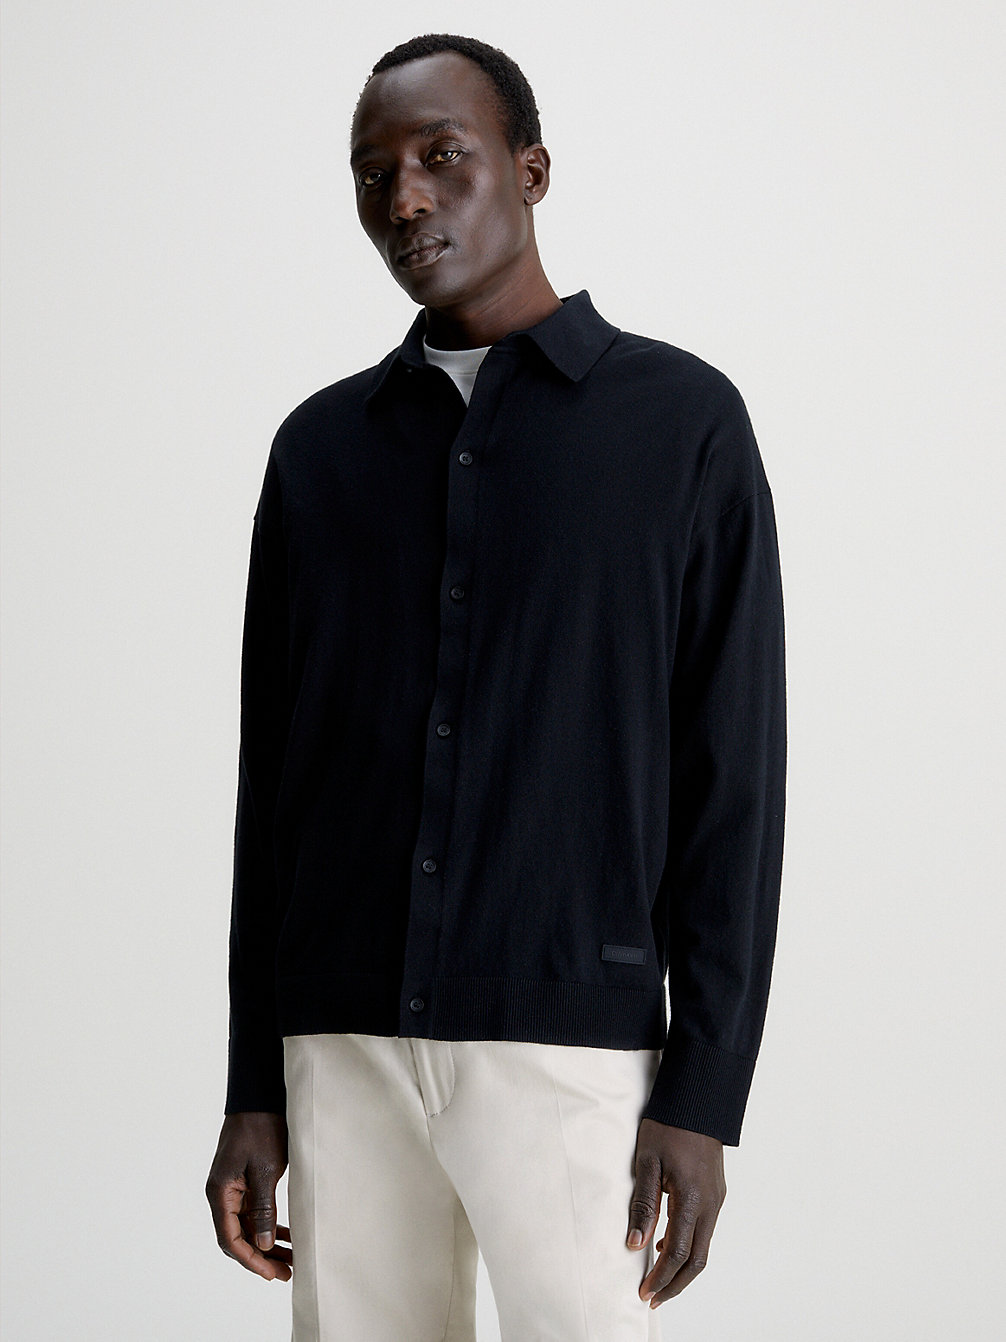 Cardigan Polo Relaxed Coolmax > CK BLACK > undefined hommes > Calvin Klein